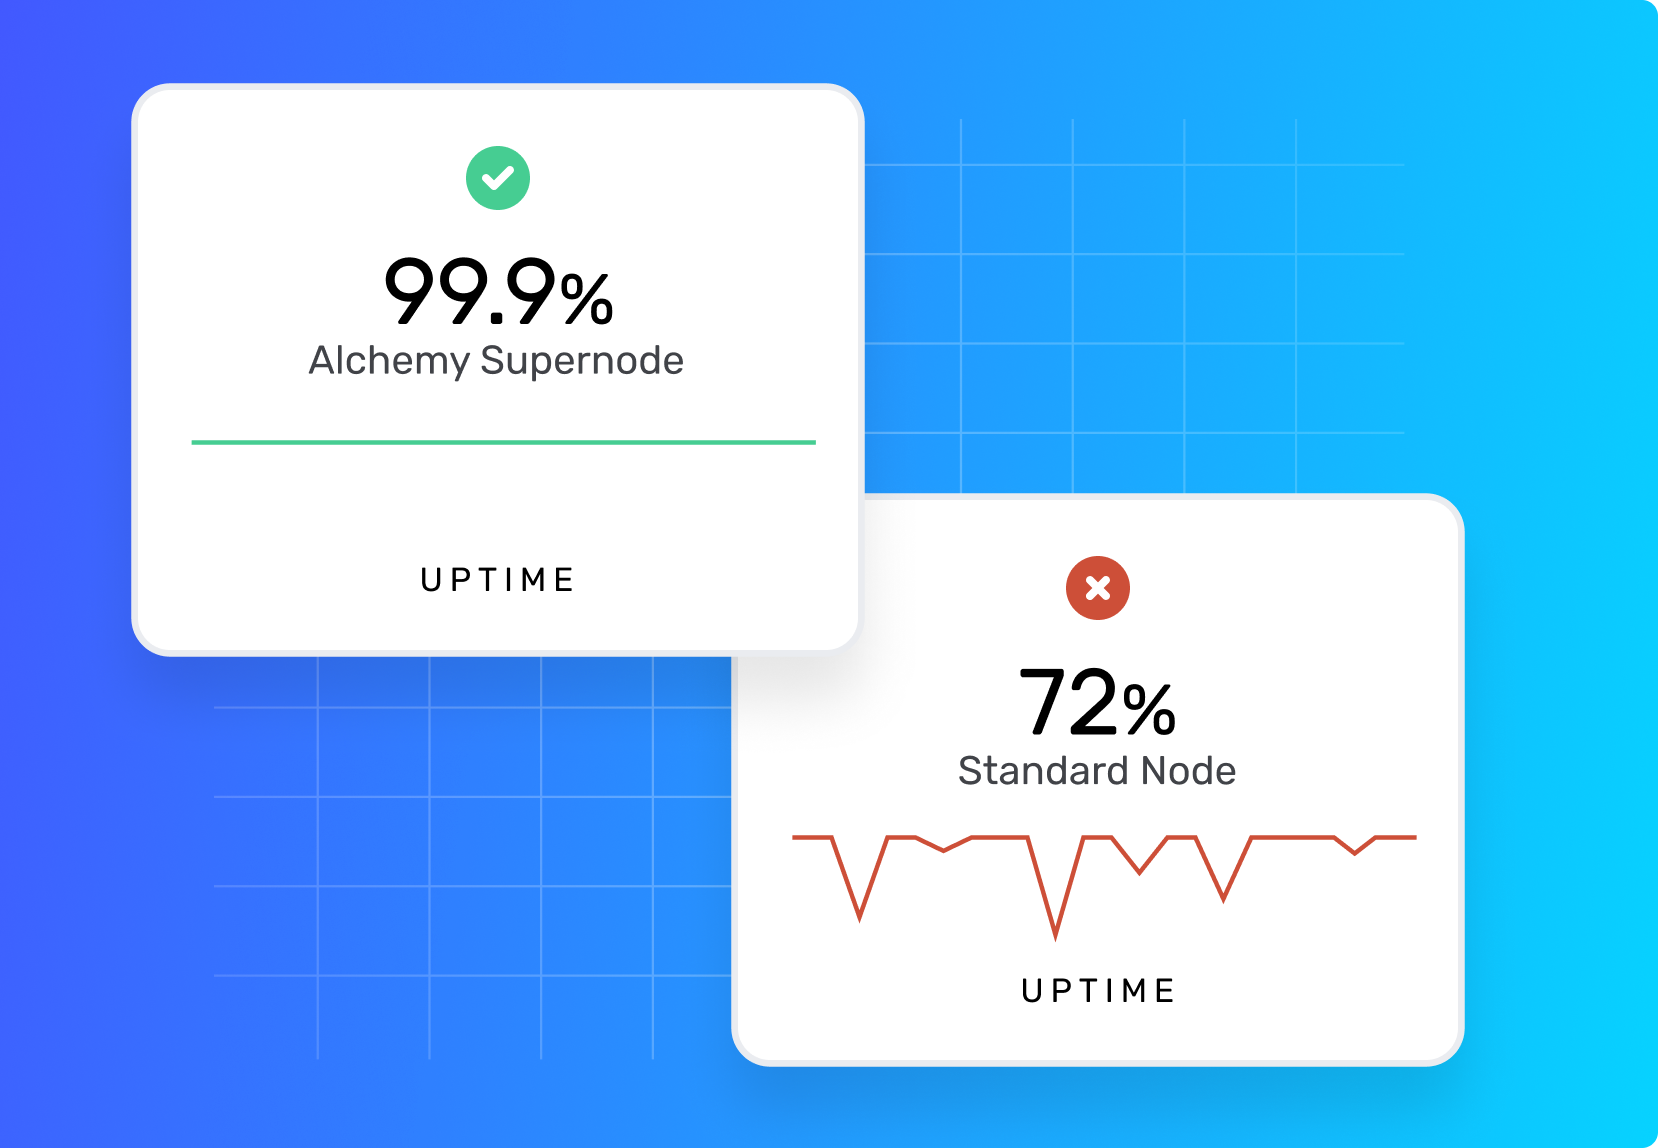 infographic-comparing uptime of alchemy supernode with standard node